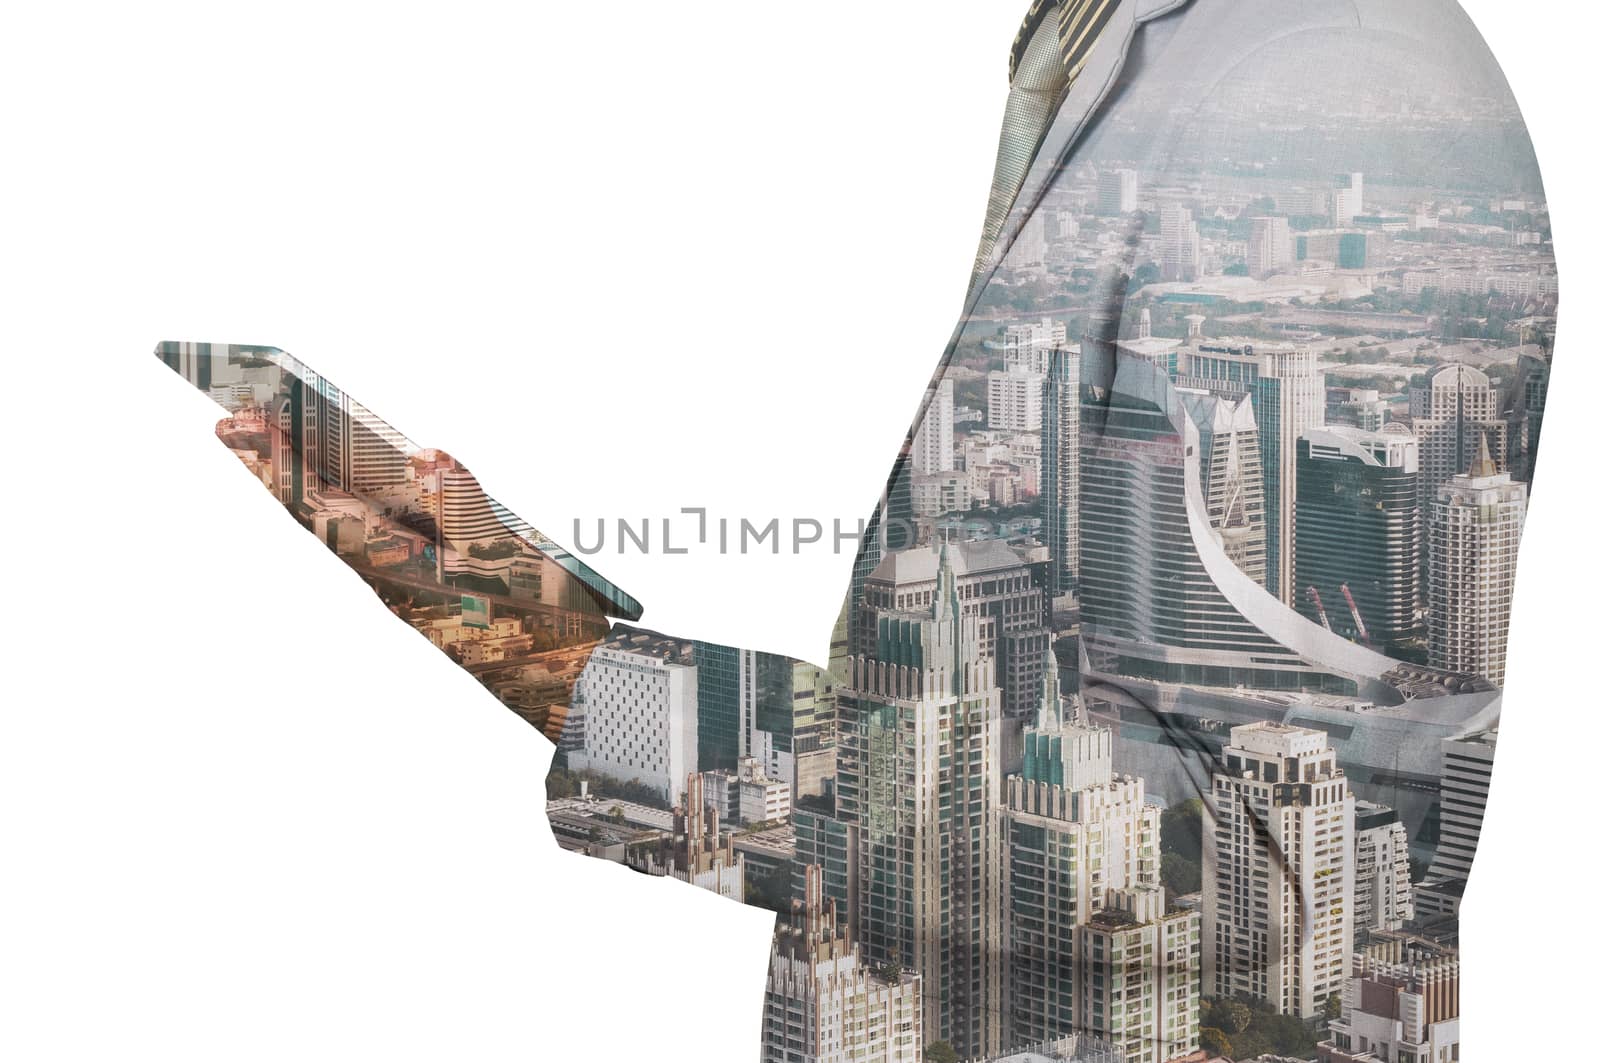 Double exposure of a businessman and a city using a tablet over white background